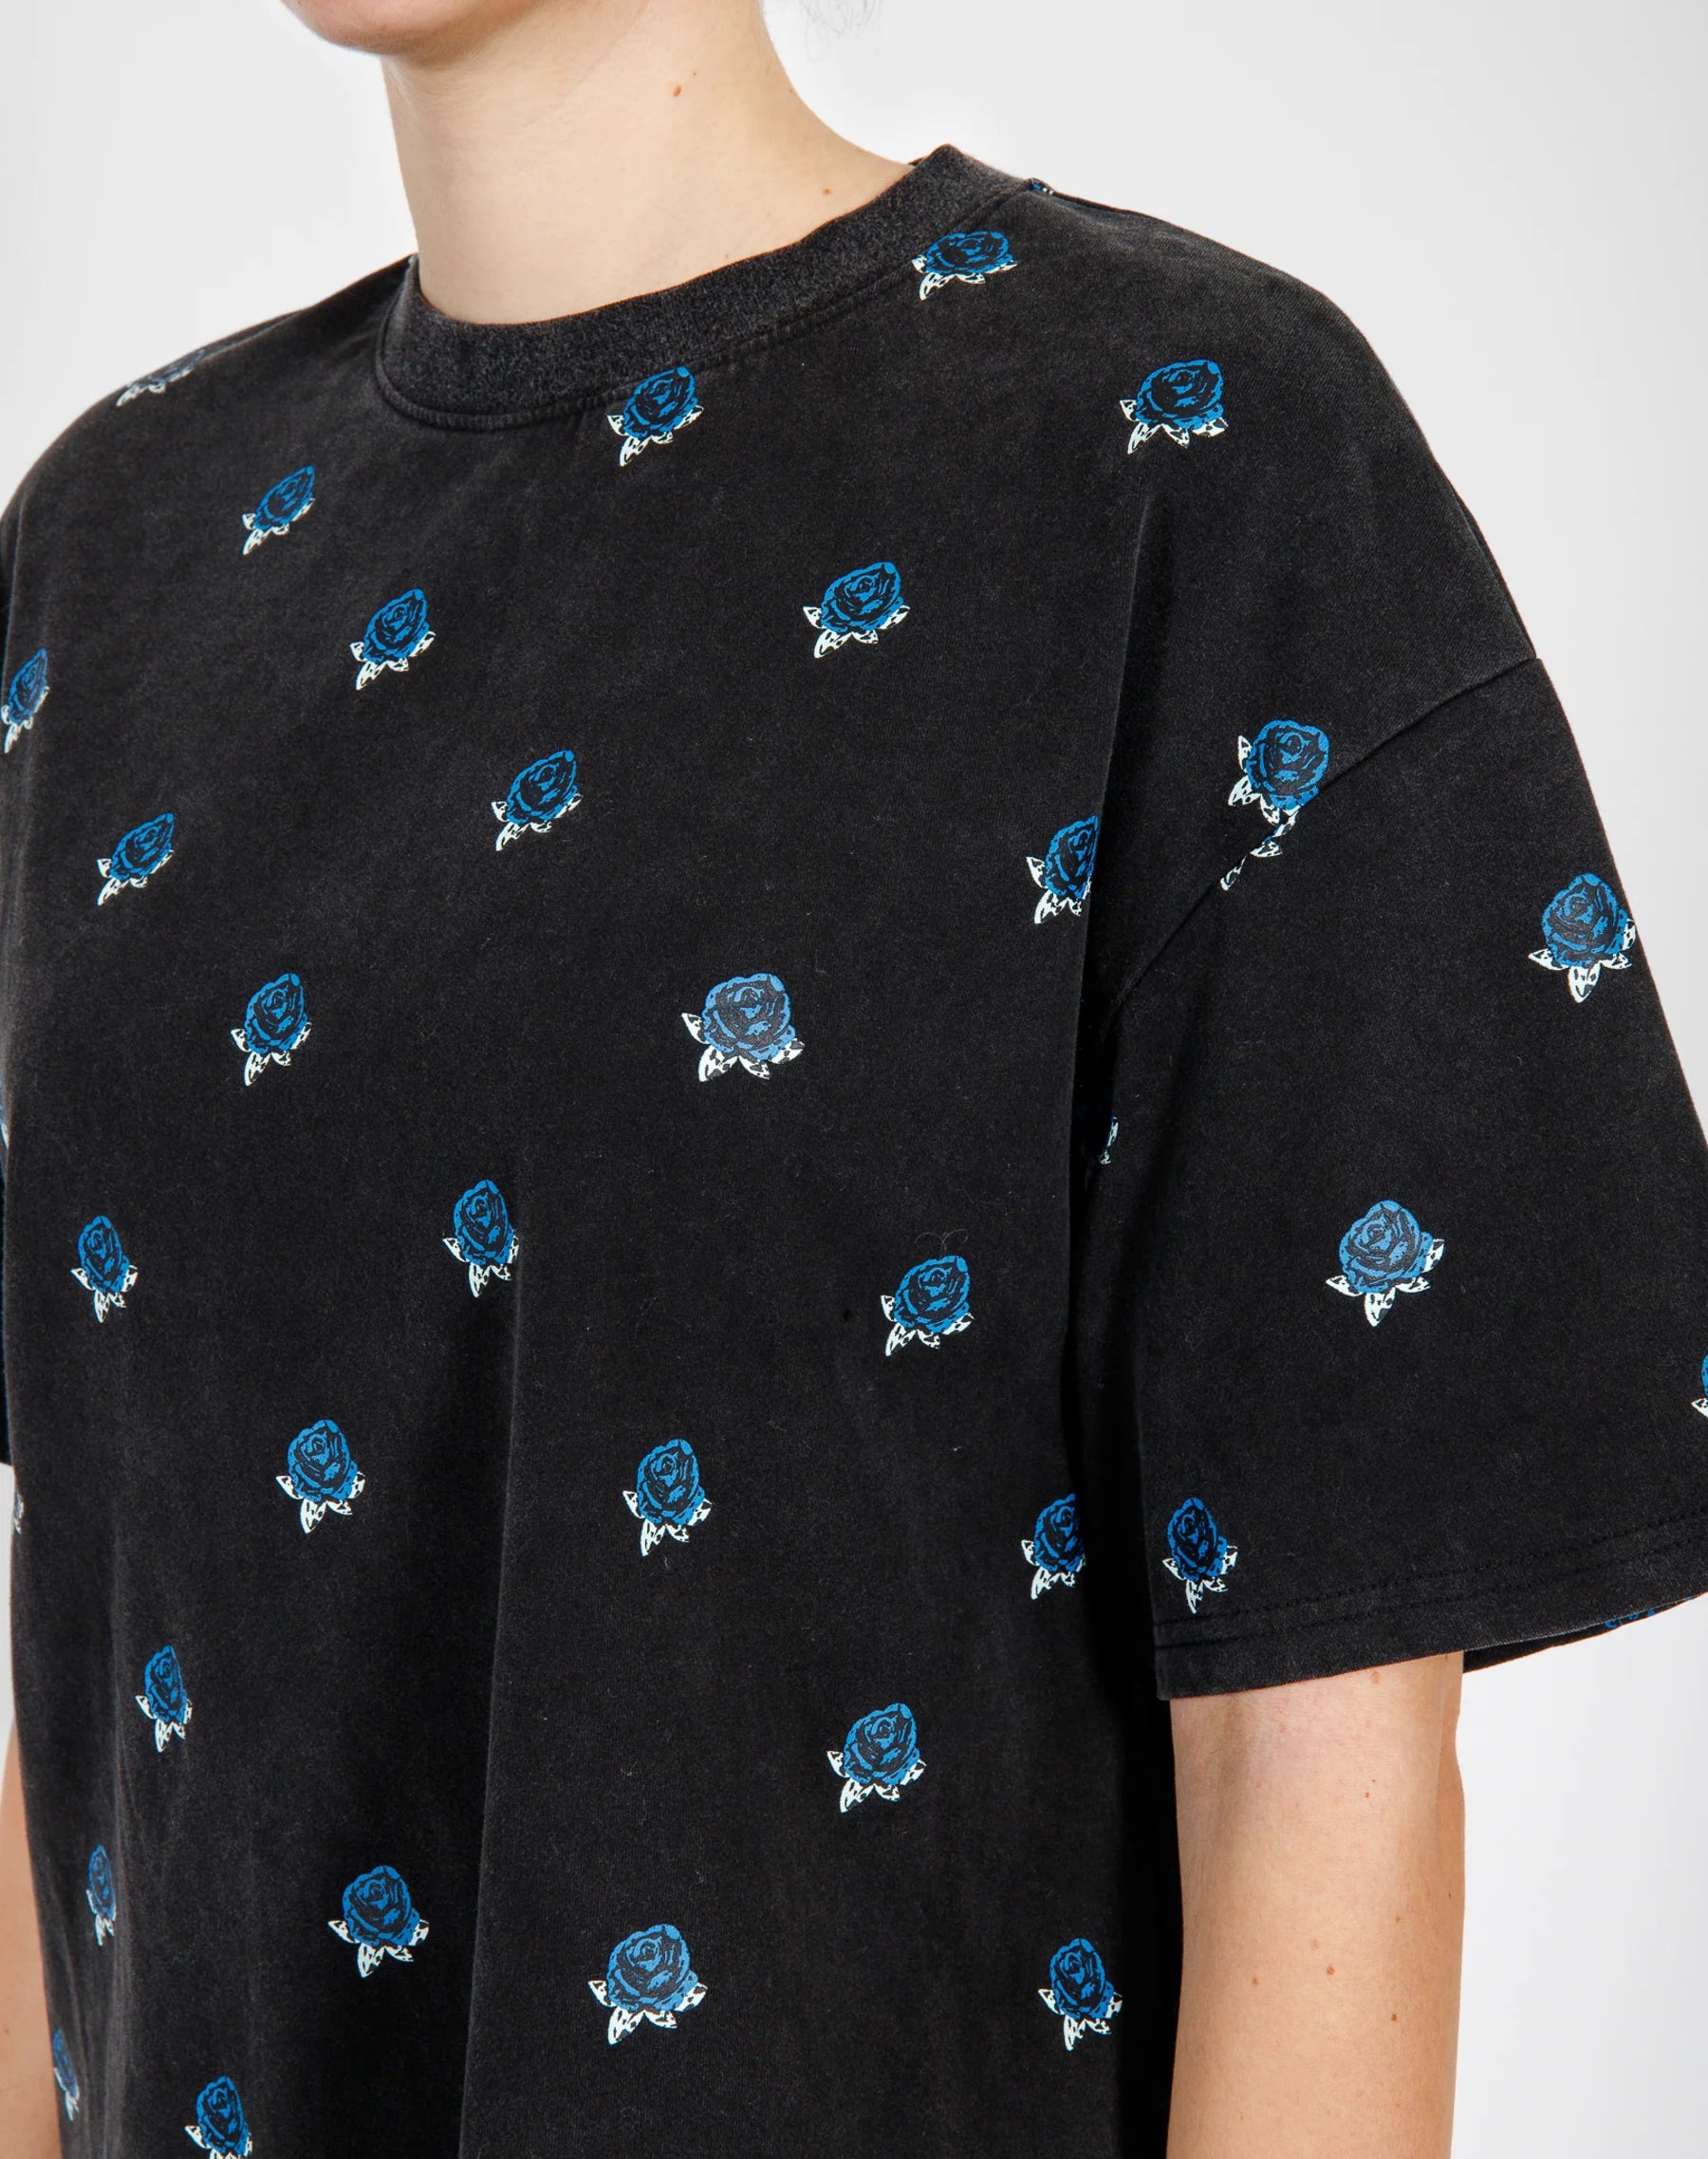 "ALL OVER ROSE" Boxy Crew Neck Tee - ResidentFashion